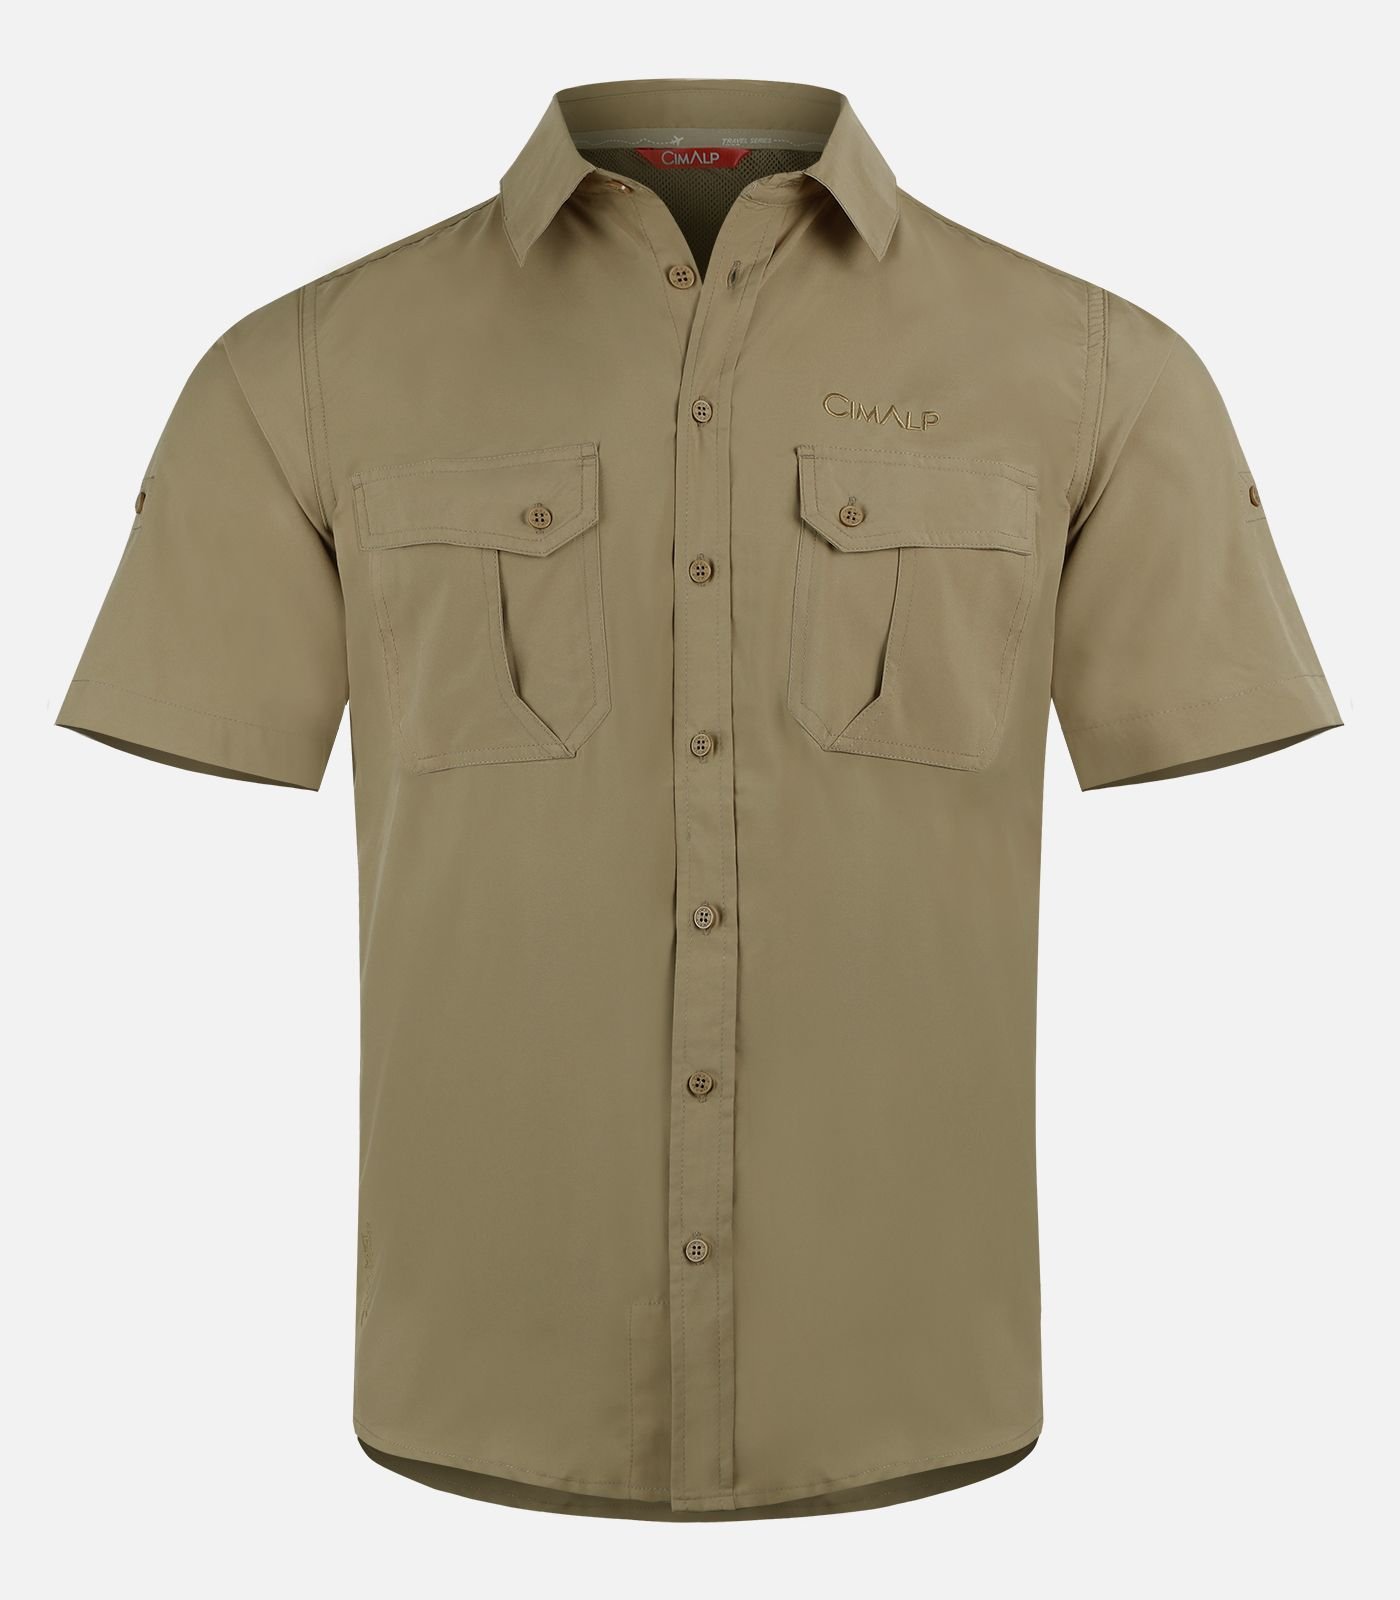 ANTON 4 H - Beige - Men's Hiking shirt with mosquito protection and UV  protection